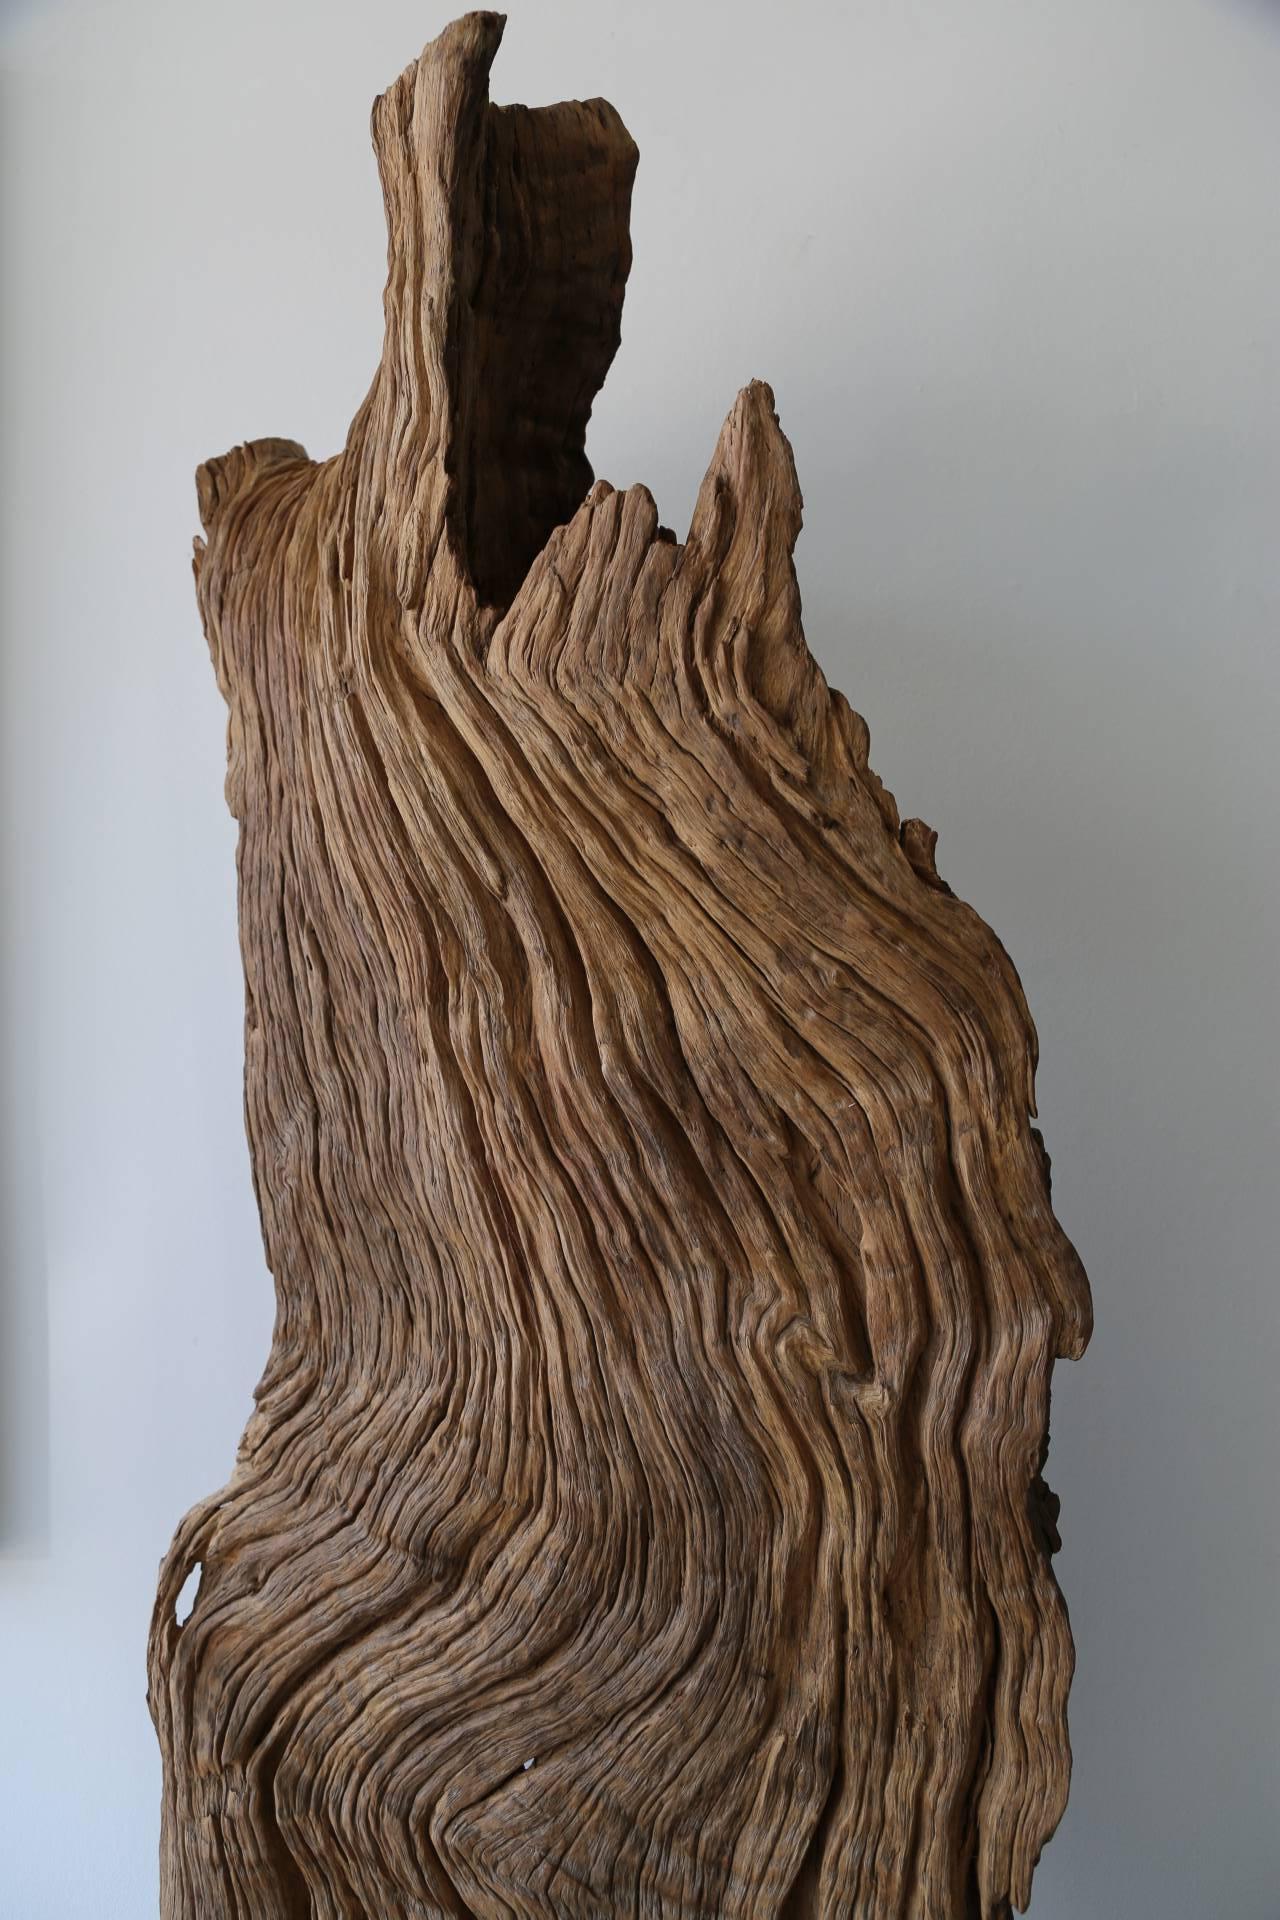 The Natural Root Form on Stand is a contemporary brown unique and natural piece of driftwood on an beautiful iron black stand that measures 75 x 24 and is priced at $6,800. 

Exhibit by Aberson has been searching for and acquiring objects from